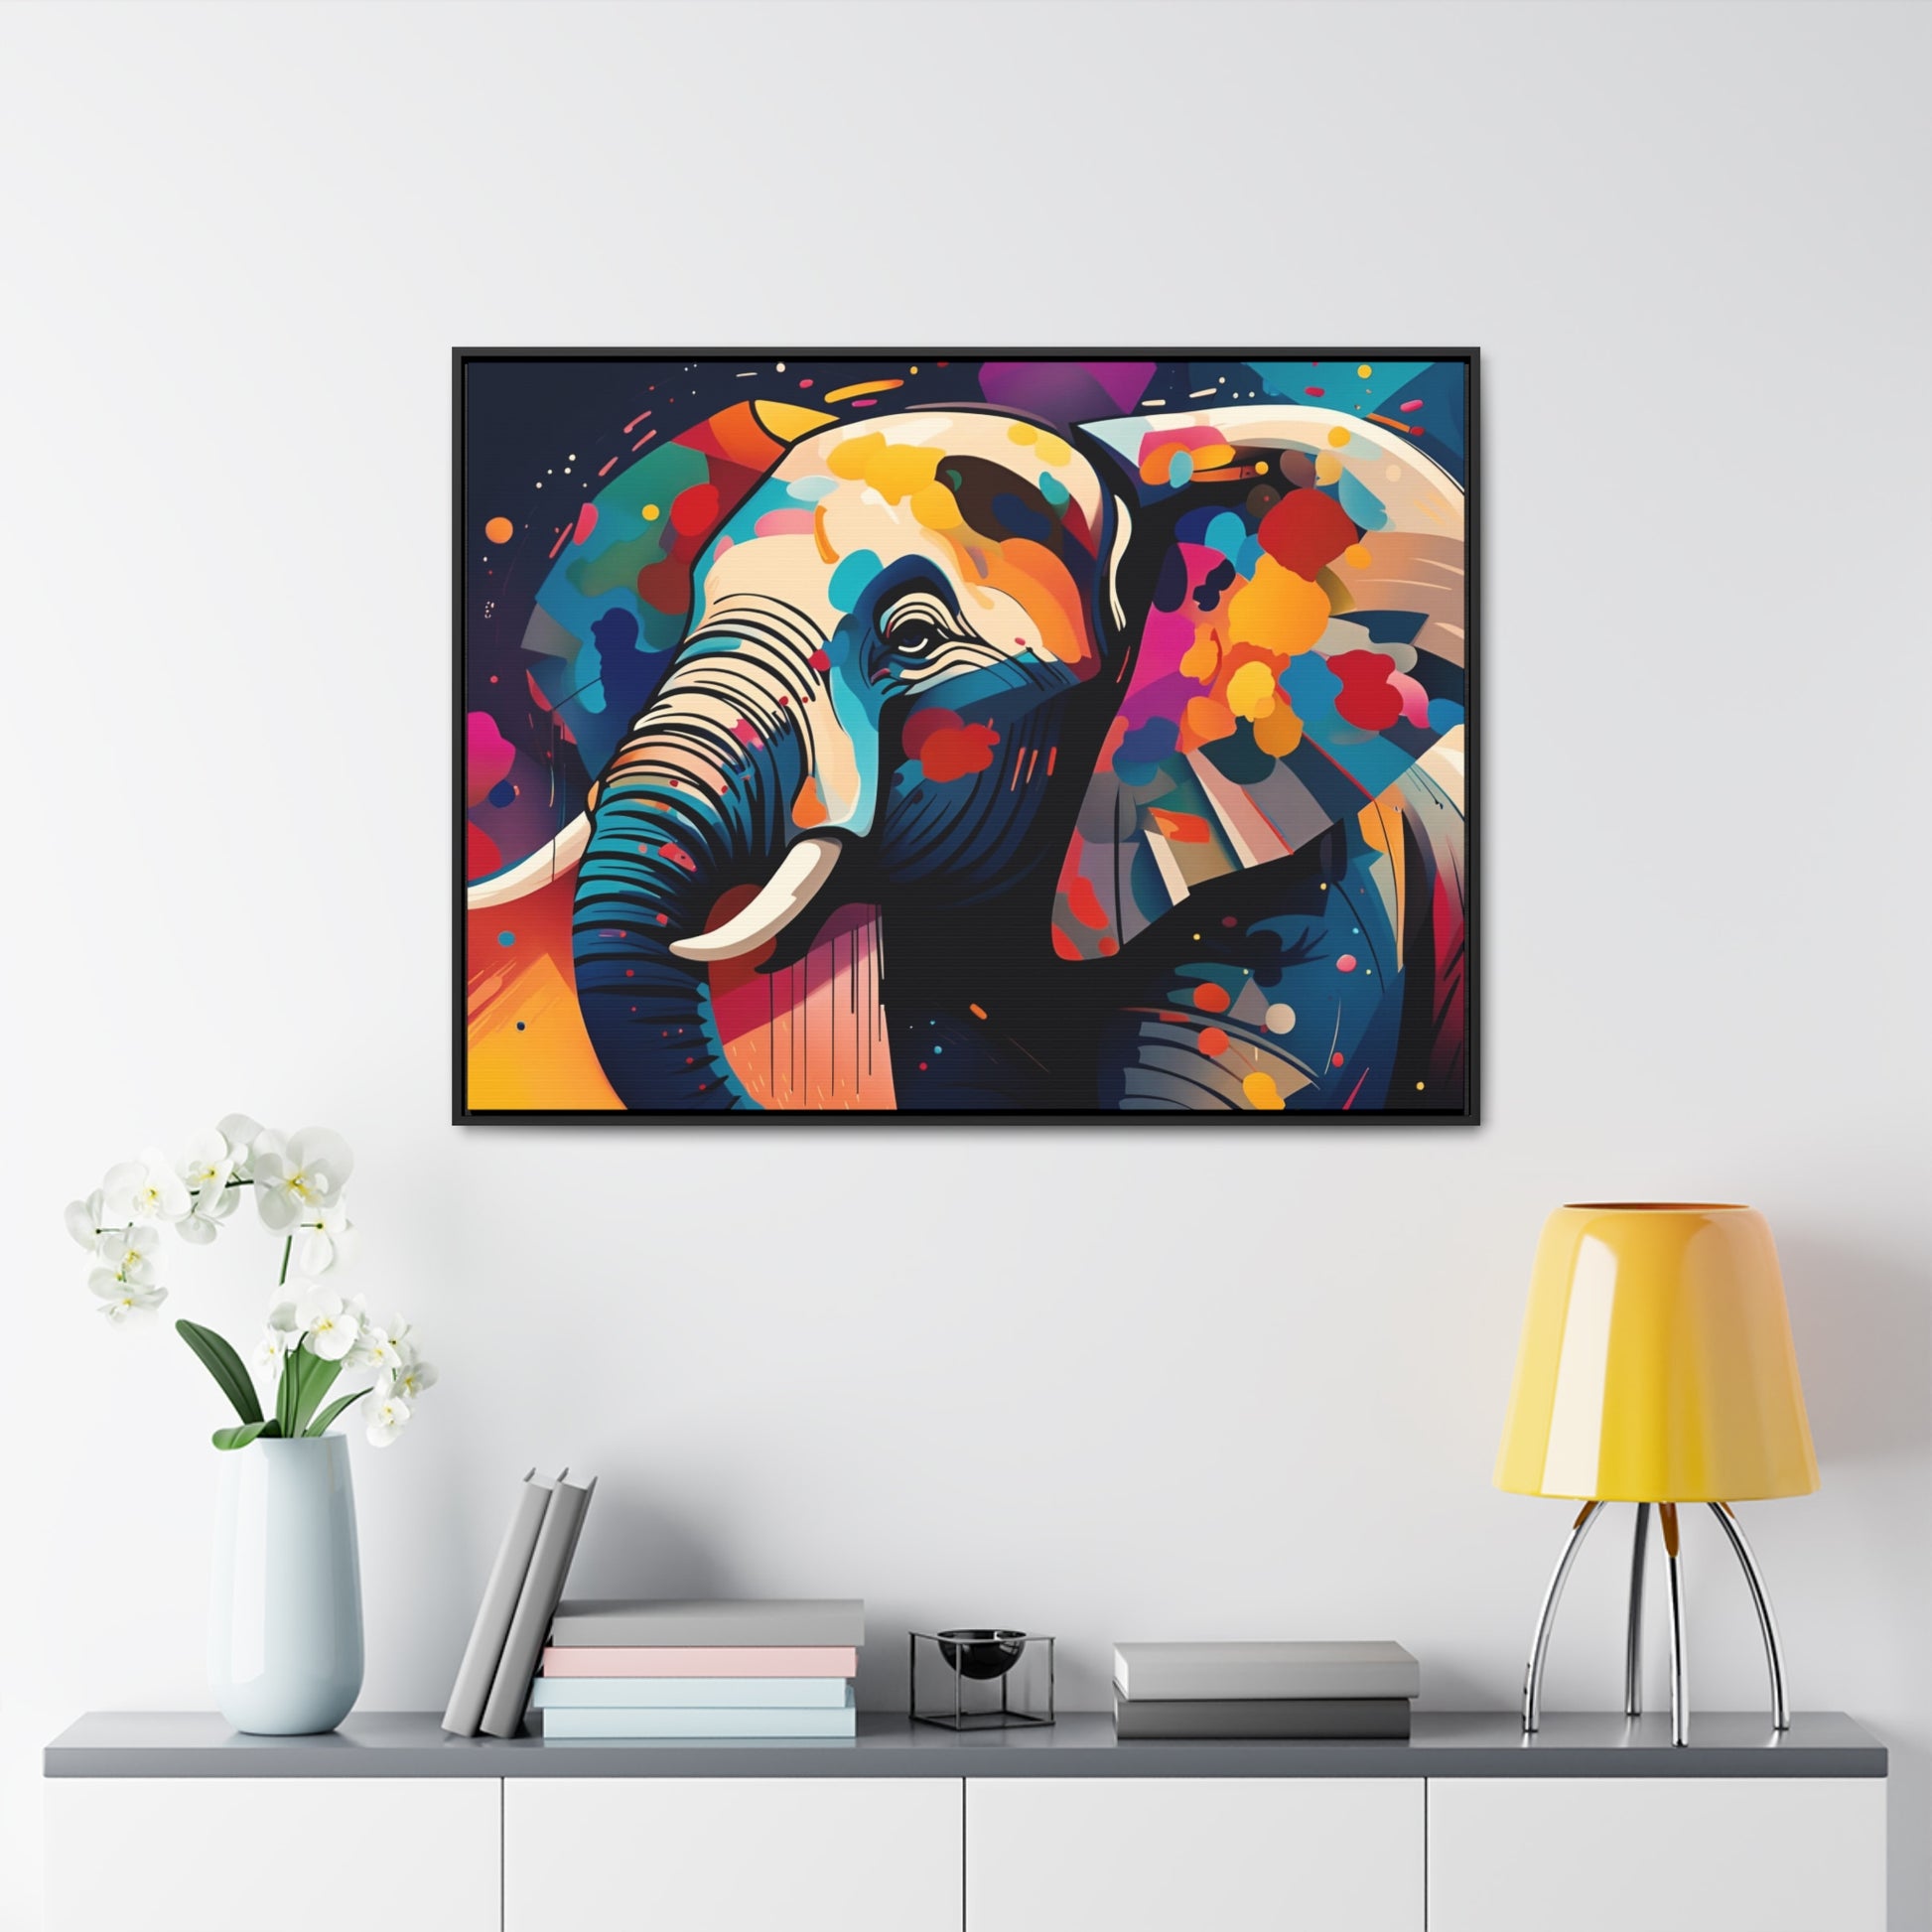 Multicolor Elephant Head Print on Canvas in a Floating Frame 30x40 hung on light wall